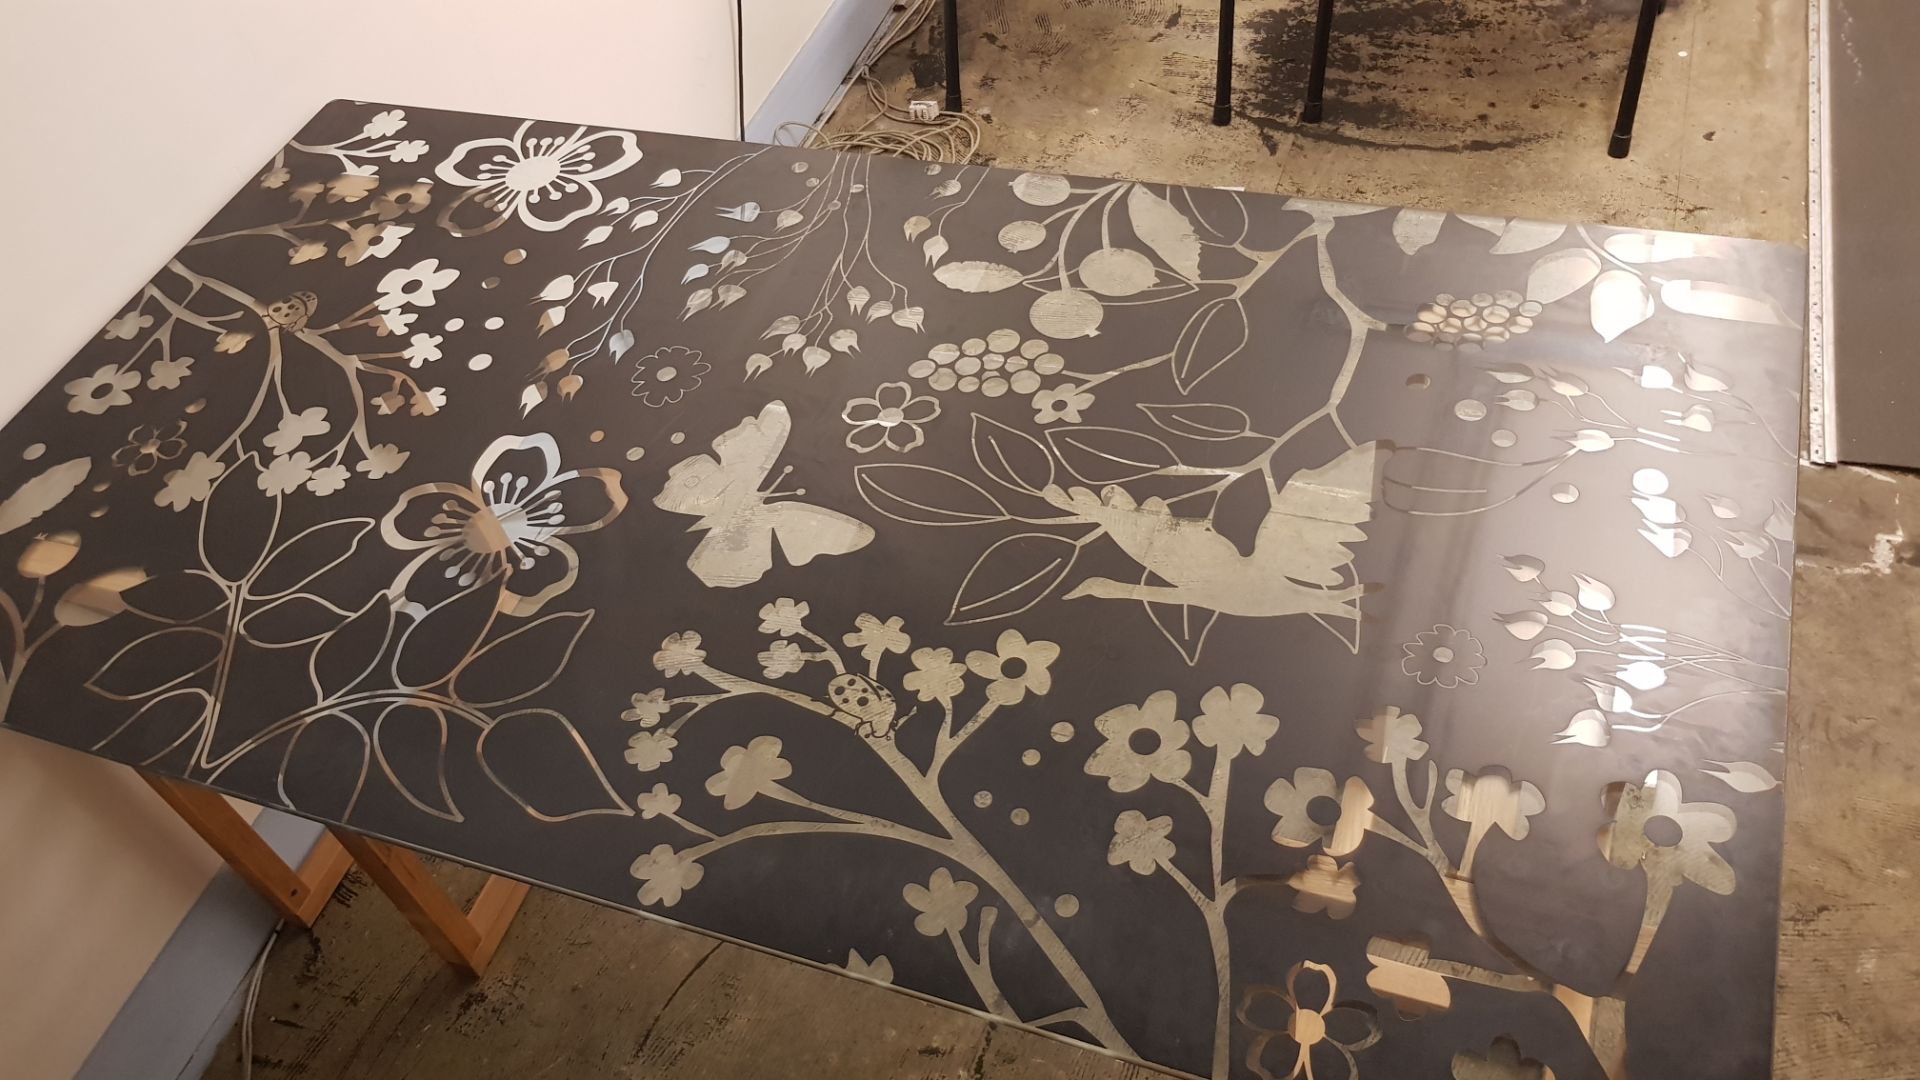 1x Decorative Floral Black Glass Table Top With Wooden Legs. (W150x D80x H72cm) - Image 3 of 4